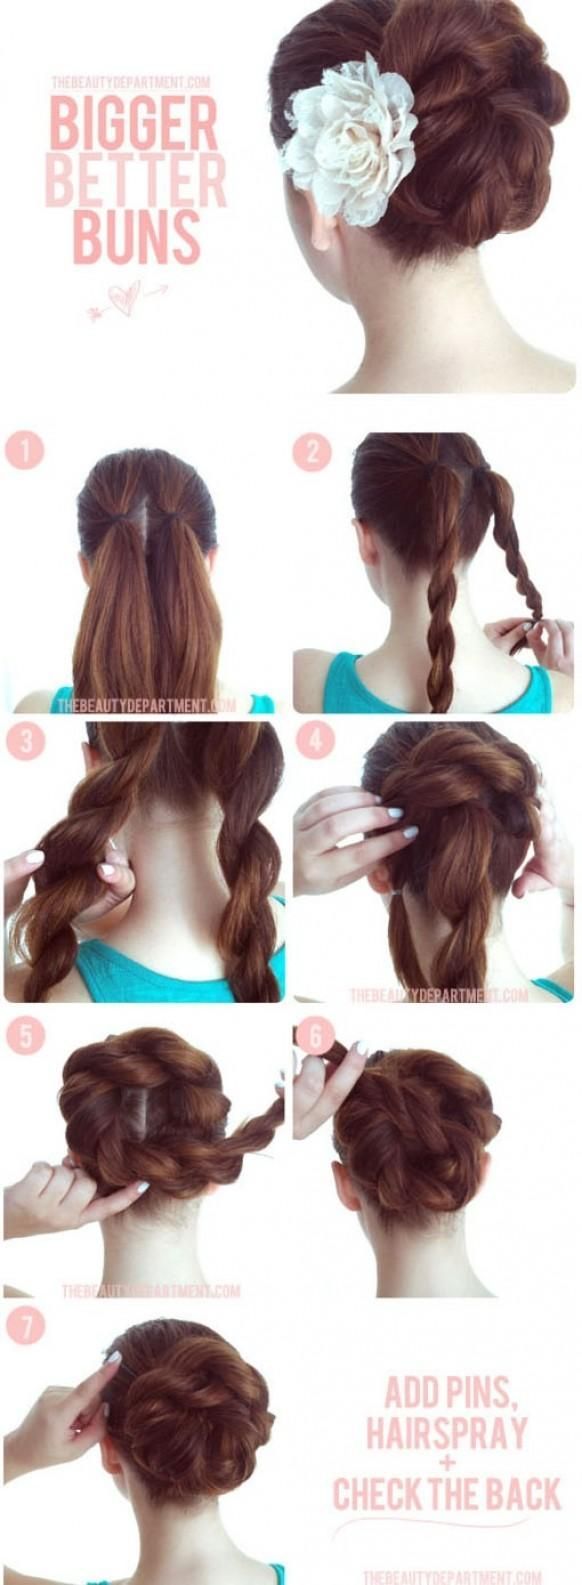 Long Hairstyles for Girls Step By Step Tutorial & Trends with Pictures (14)